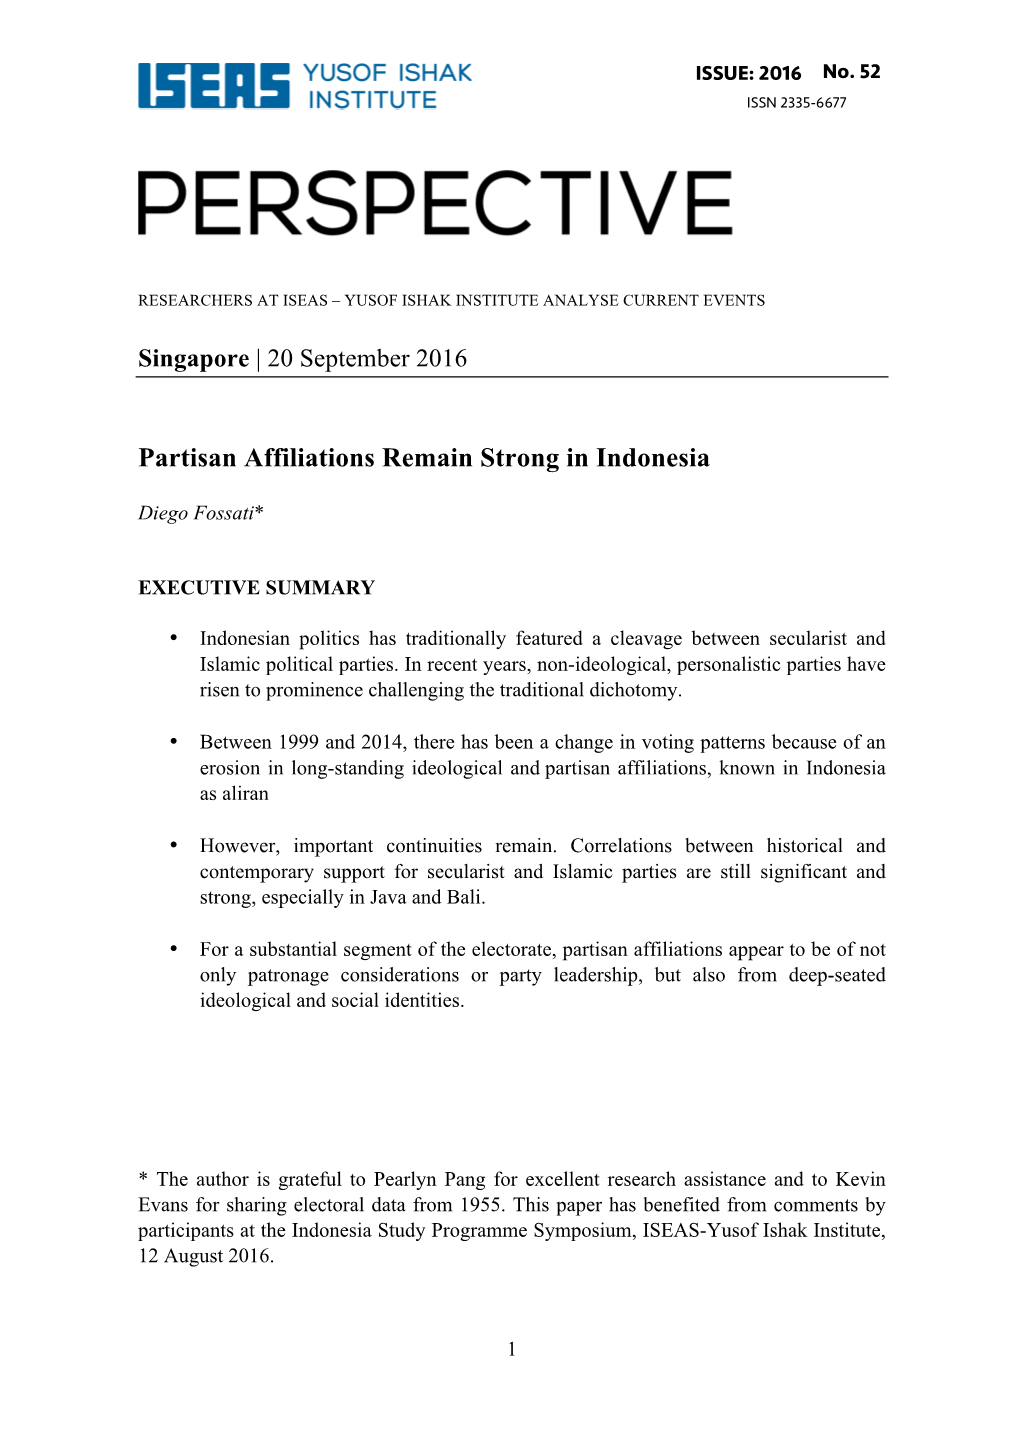 Partisan Affiliations Remain Strong in Indonesia